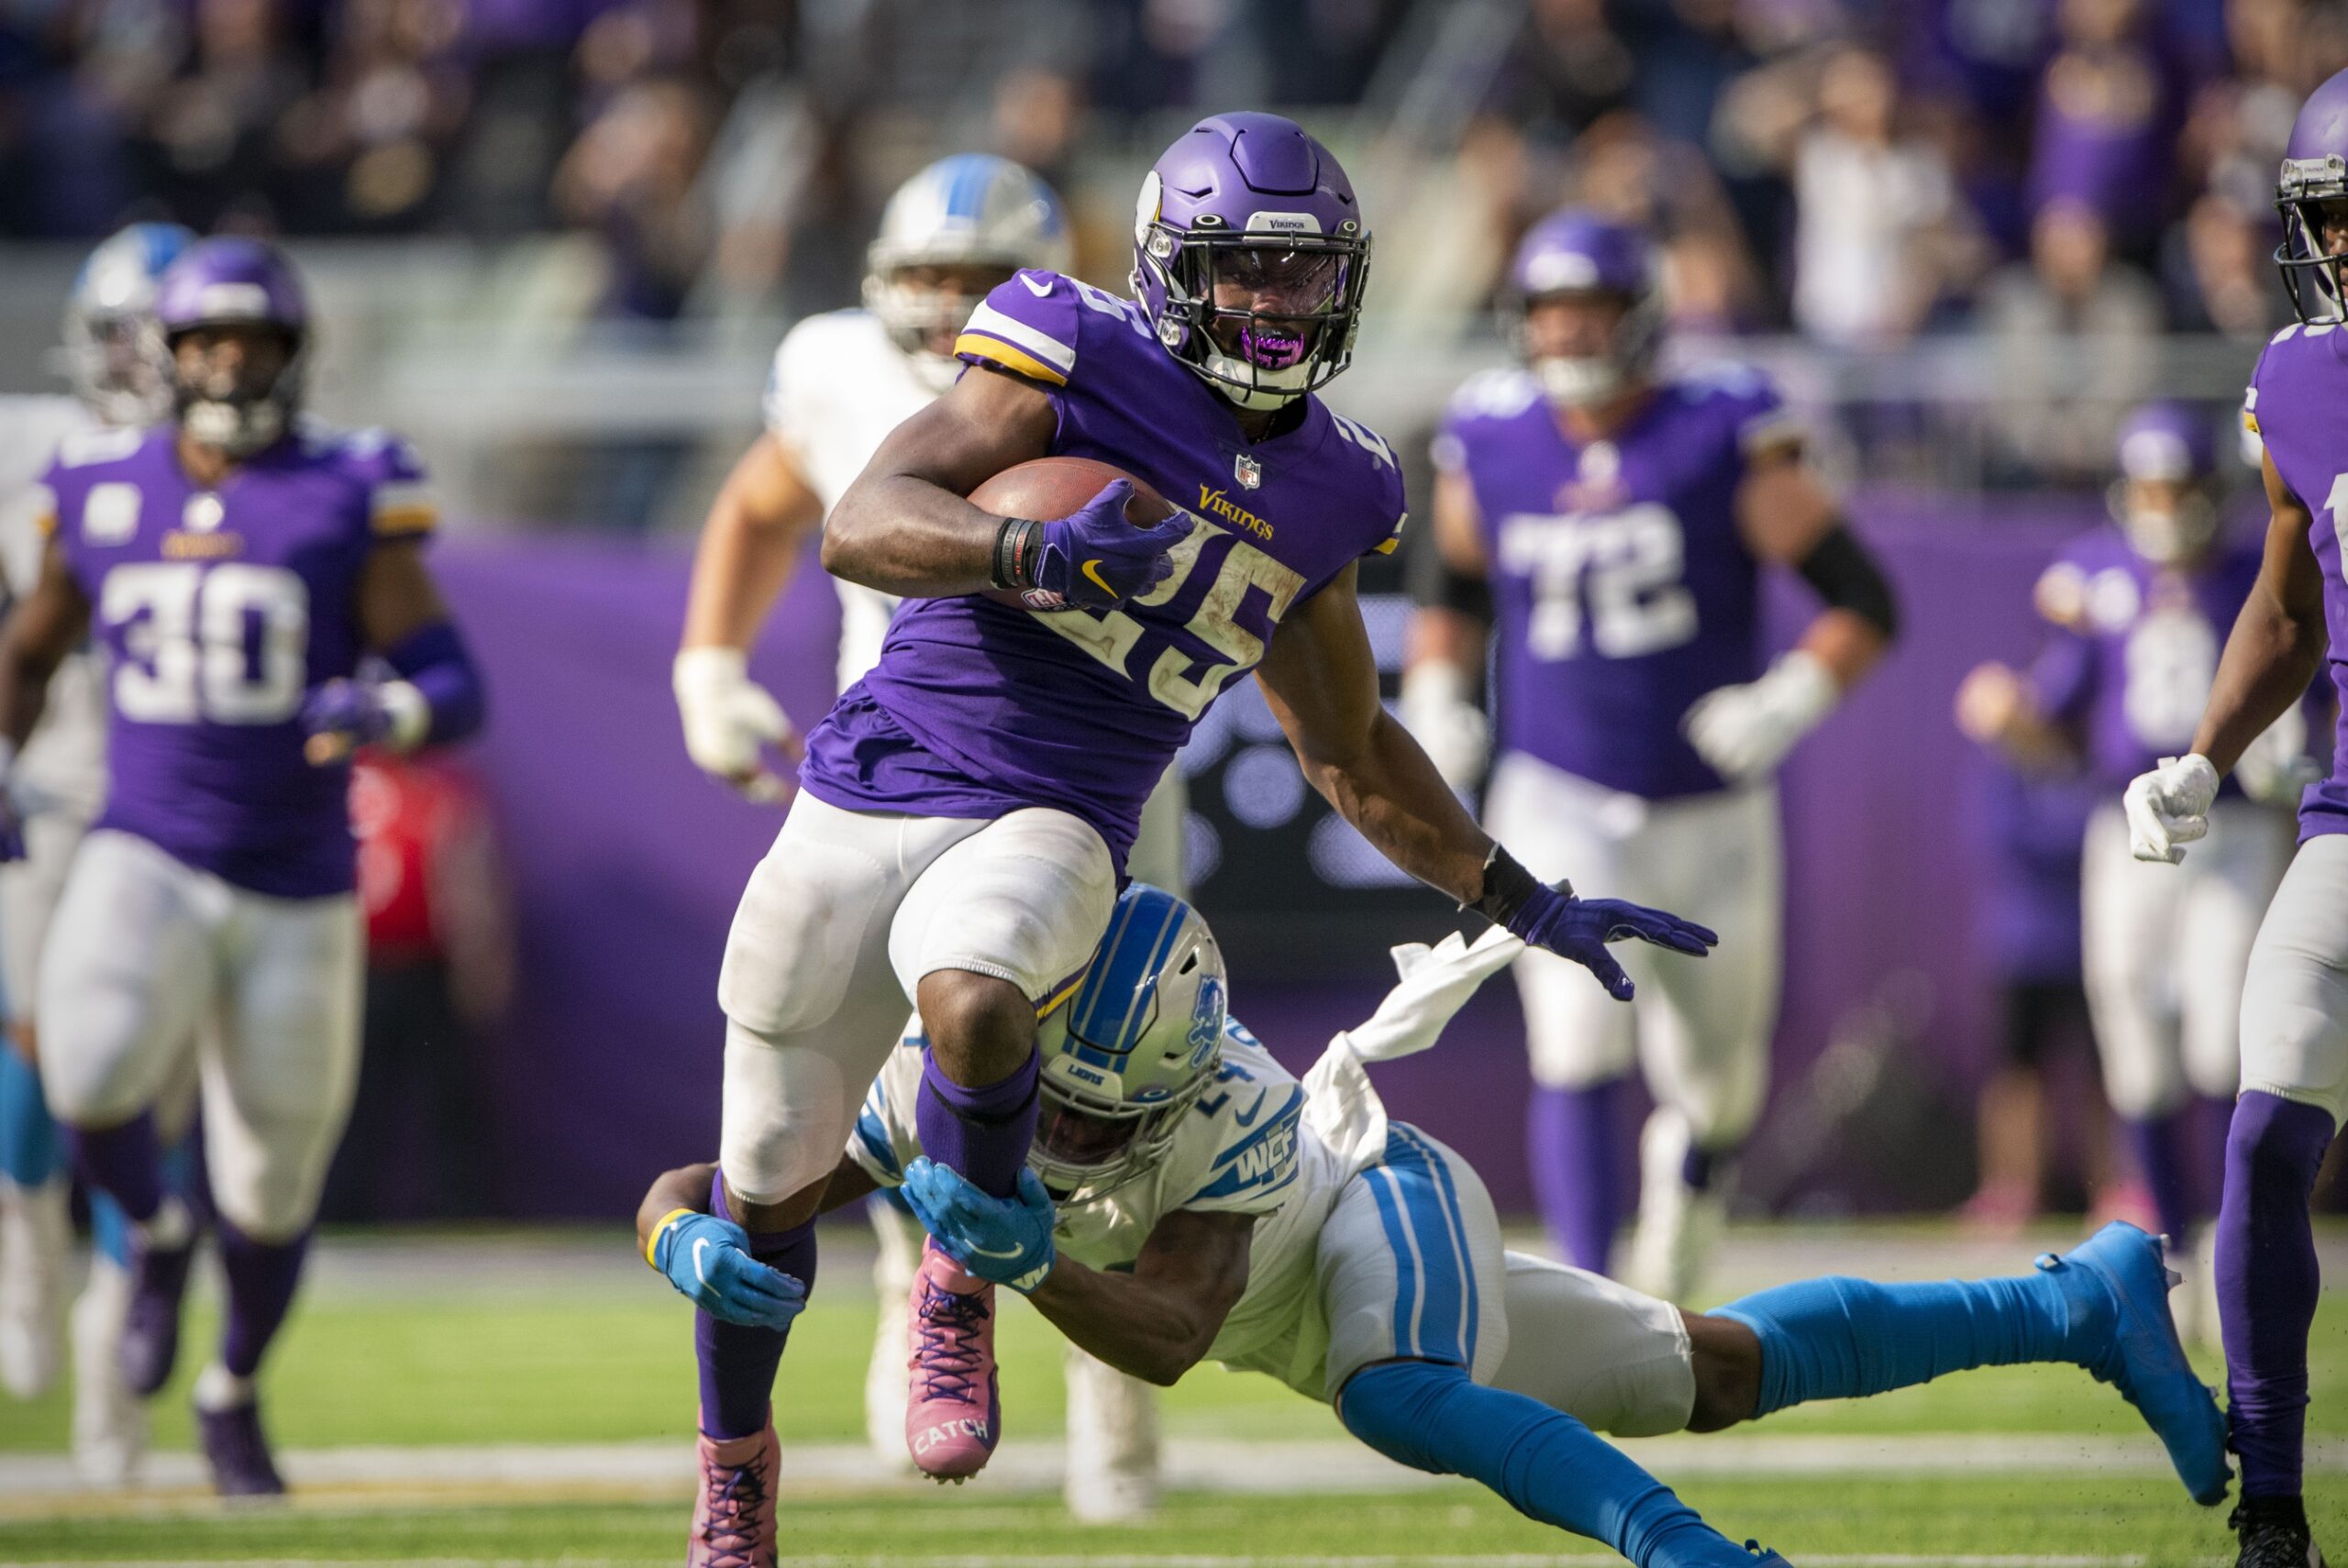 Alexander Mattison's fantasy outlook, ADP, and projection for 2022